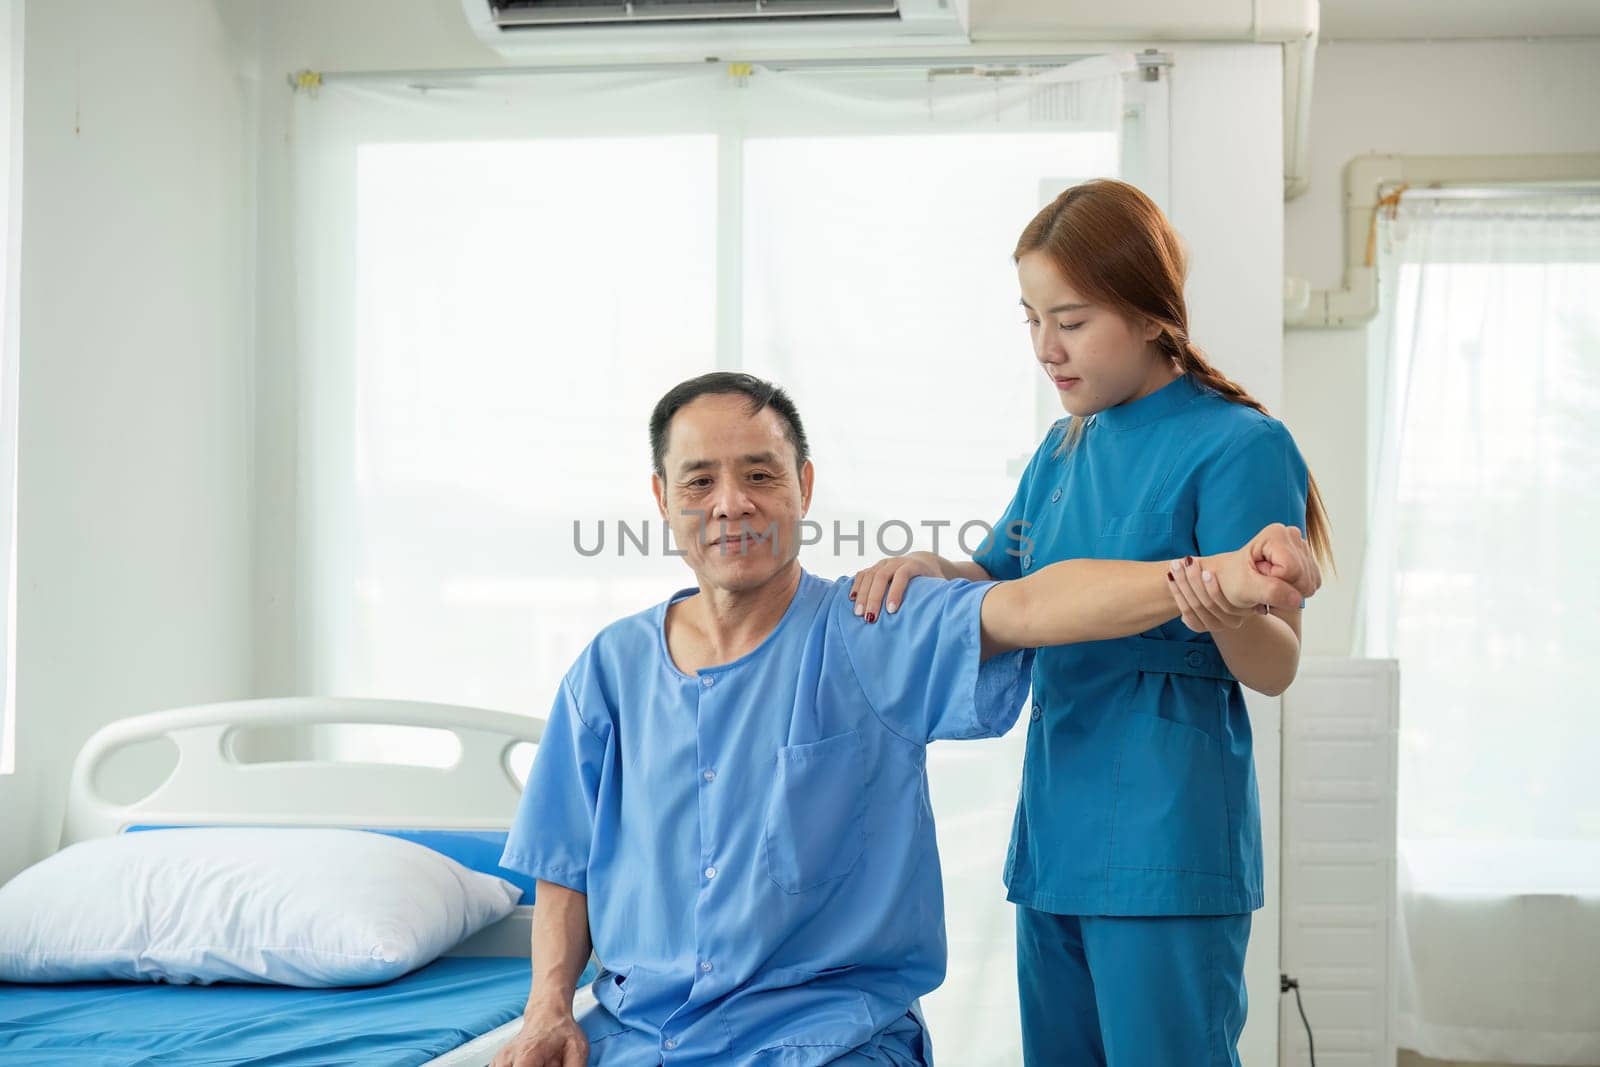 Nurse taking care of patients Help with physical therapy to restore muscles. and help take care of the health of patients by wichayada